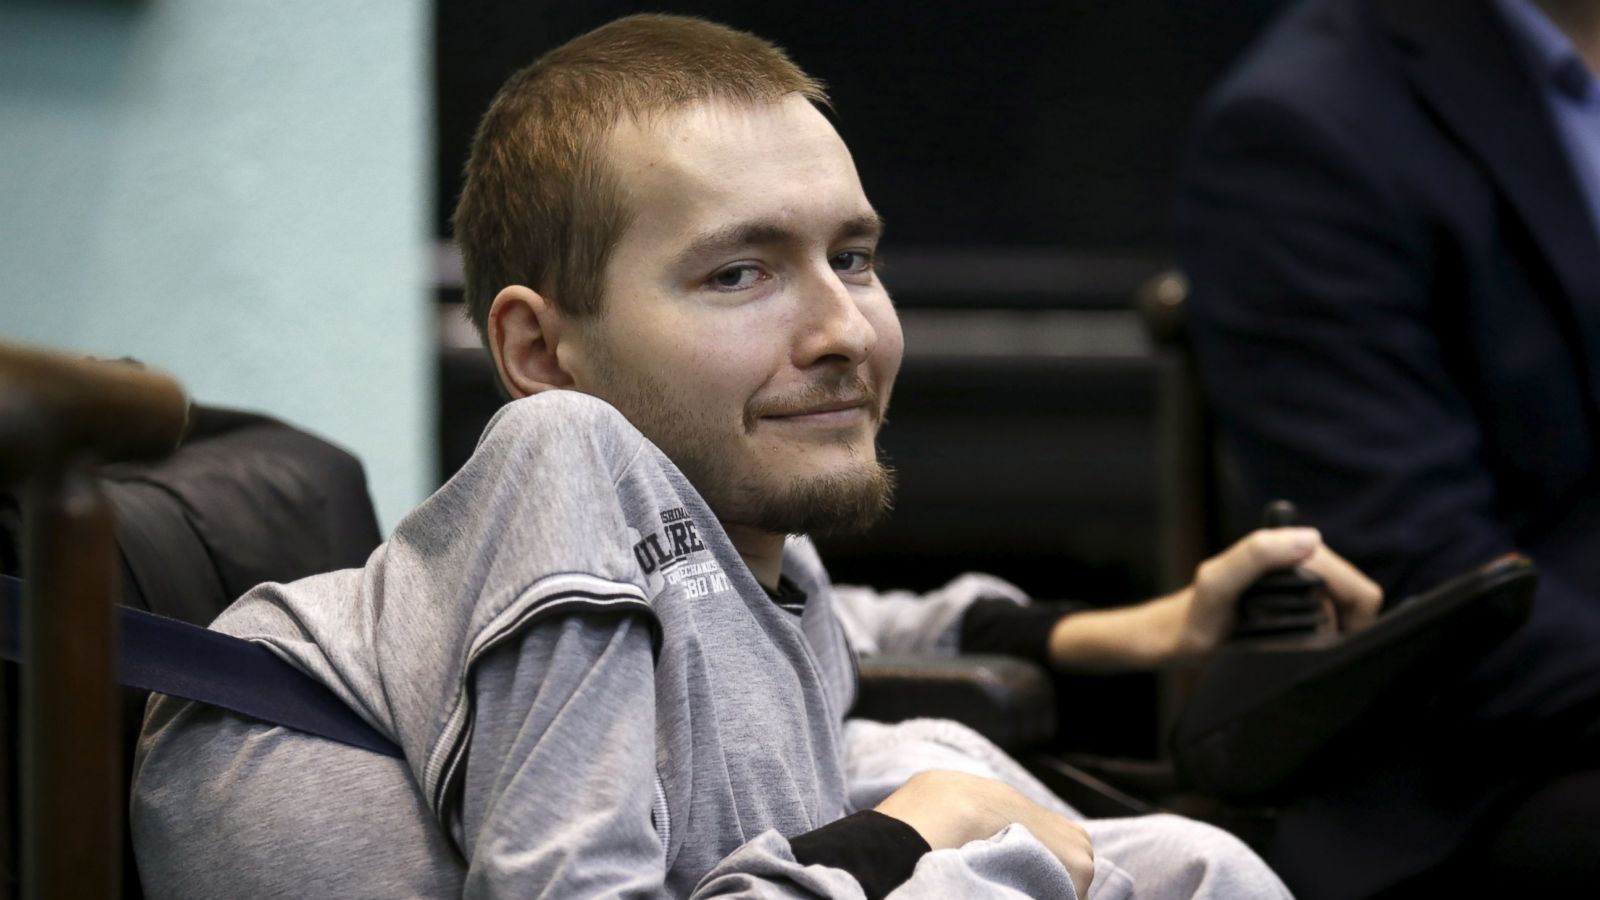 Doctor Aims to Perform Head Transplant in 2017, Experts Remain Skeptical -  ABC News